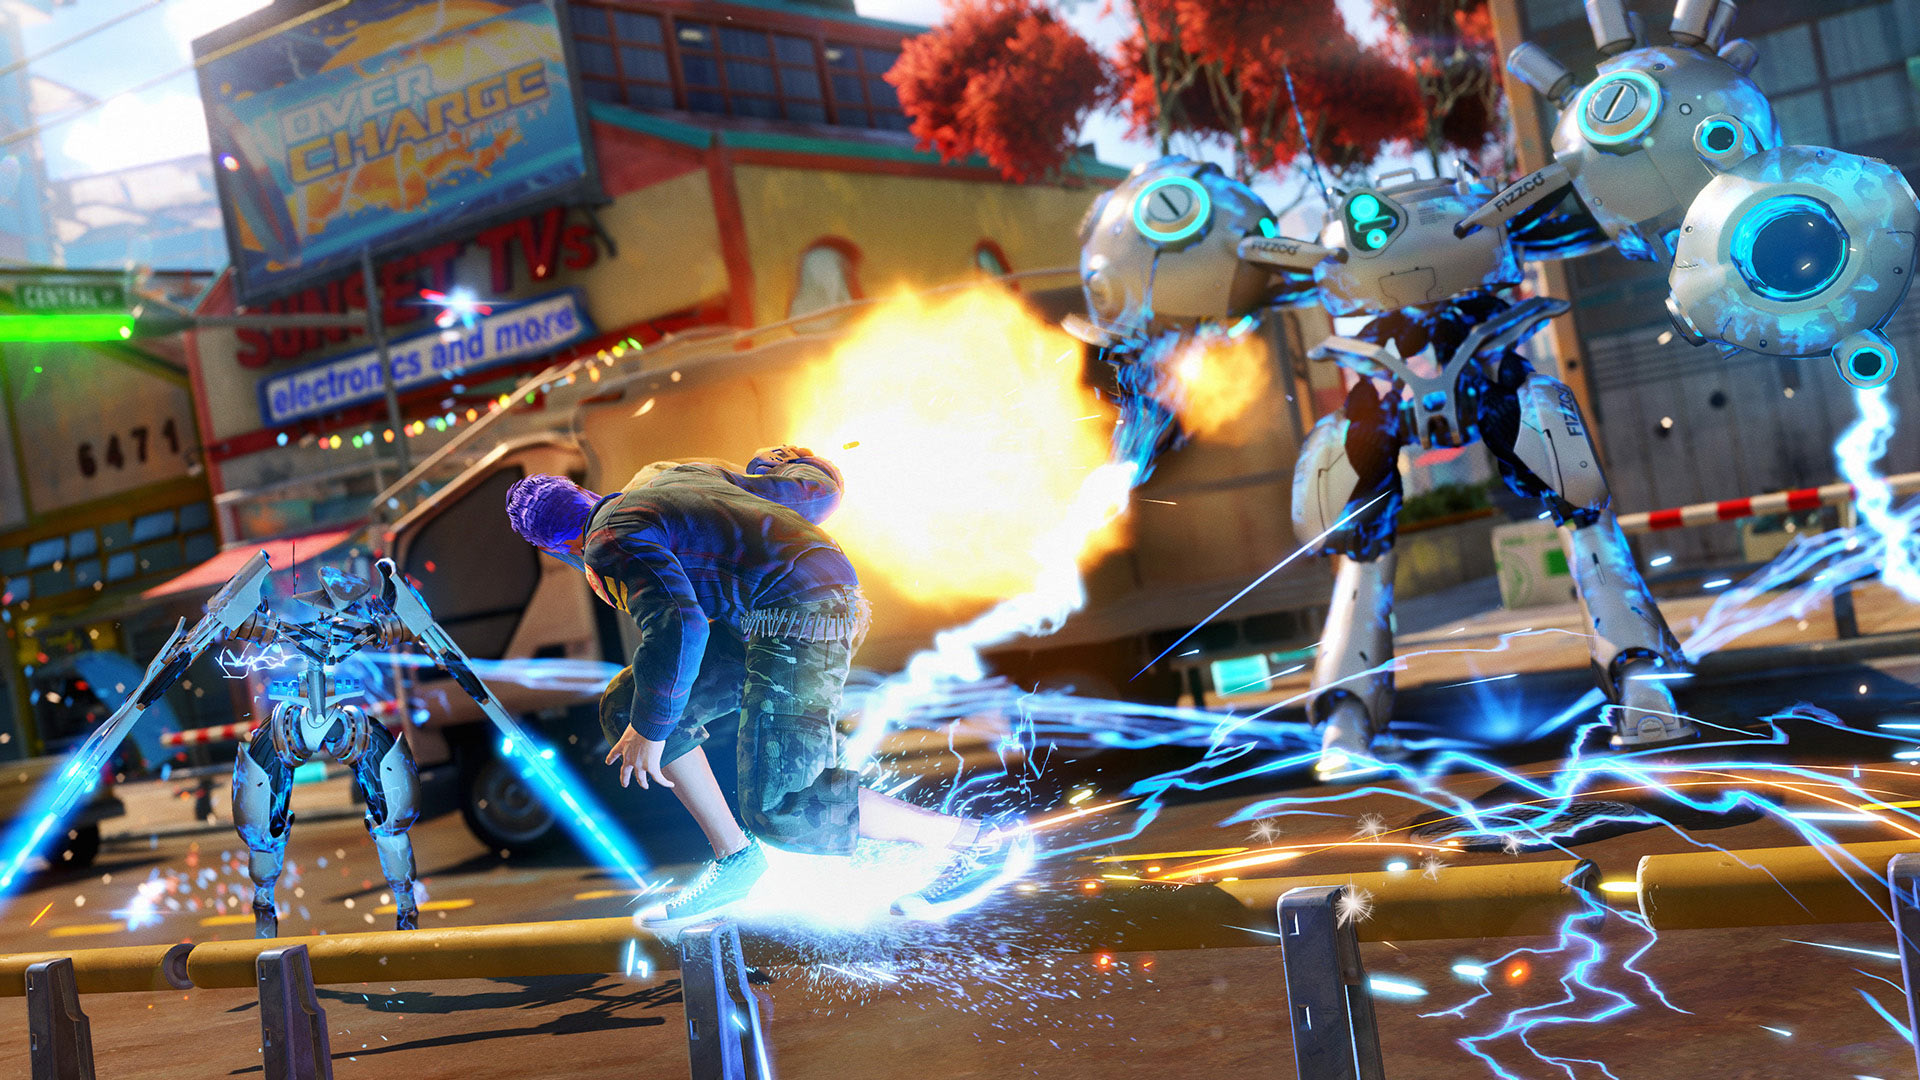 GAME PLAYERS 23: SUNSET OVERDRIVE  Sunset overdrive, Xbox one games, Sunset  city